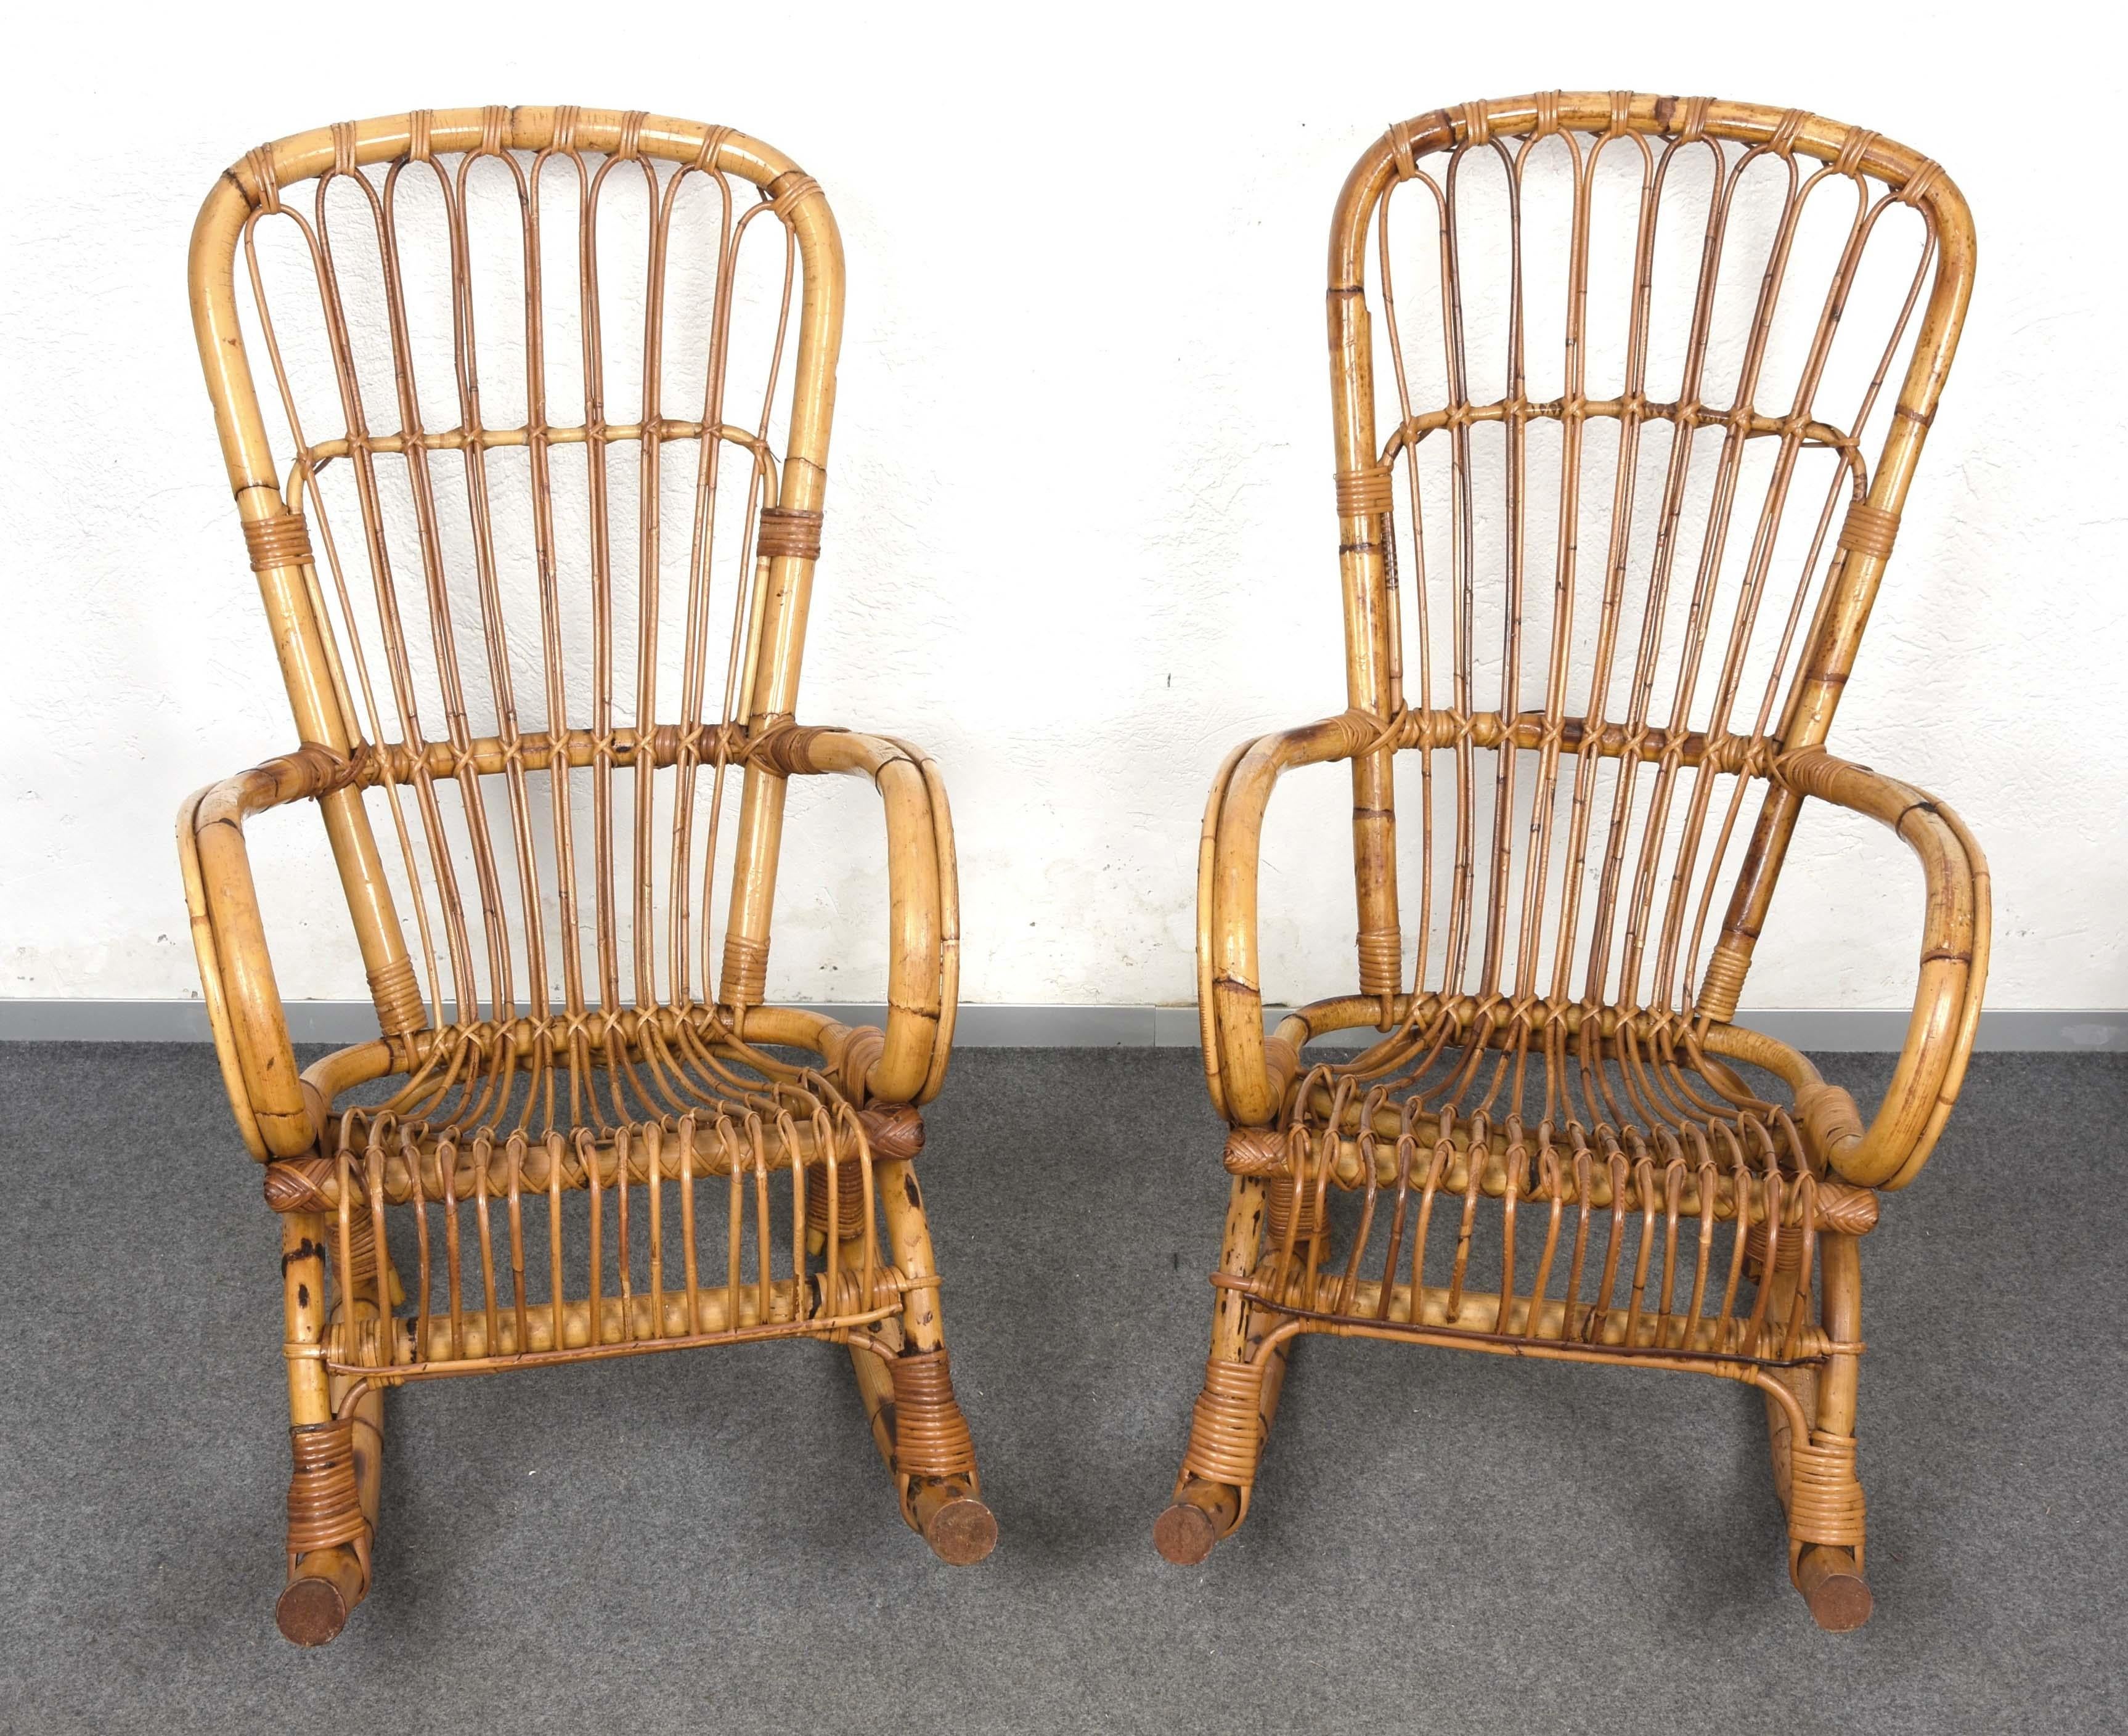 Pair of Midcentury Cote d'Azur Rattan and Bamboo Italian Rocking Chairs, 1960s For Sale 3